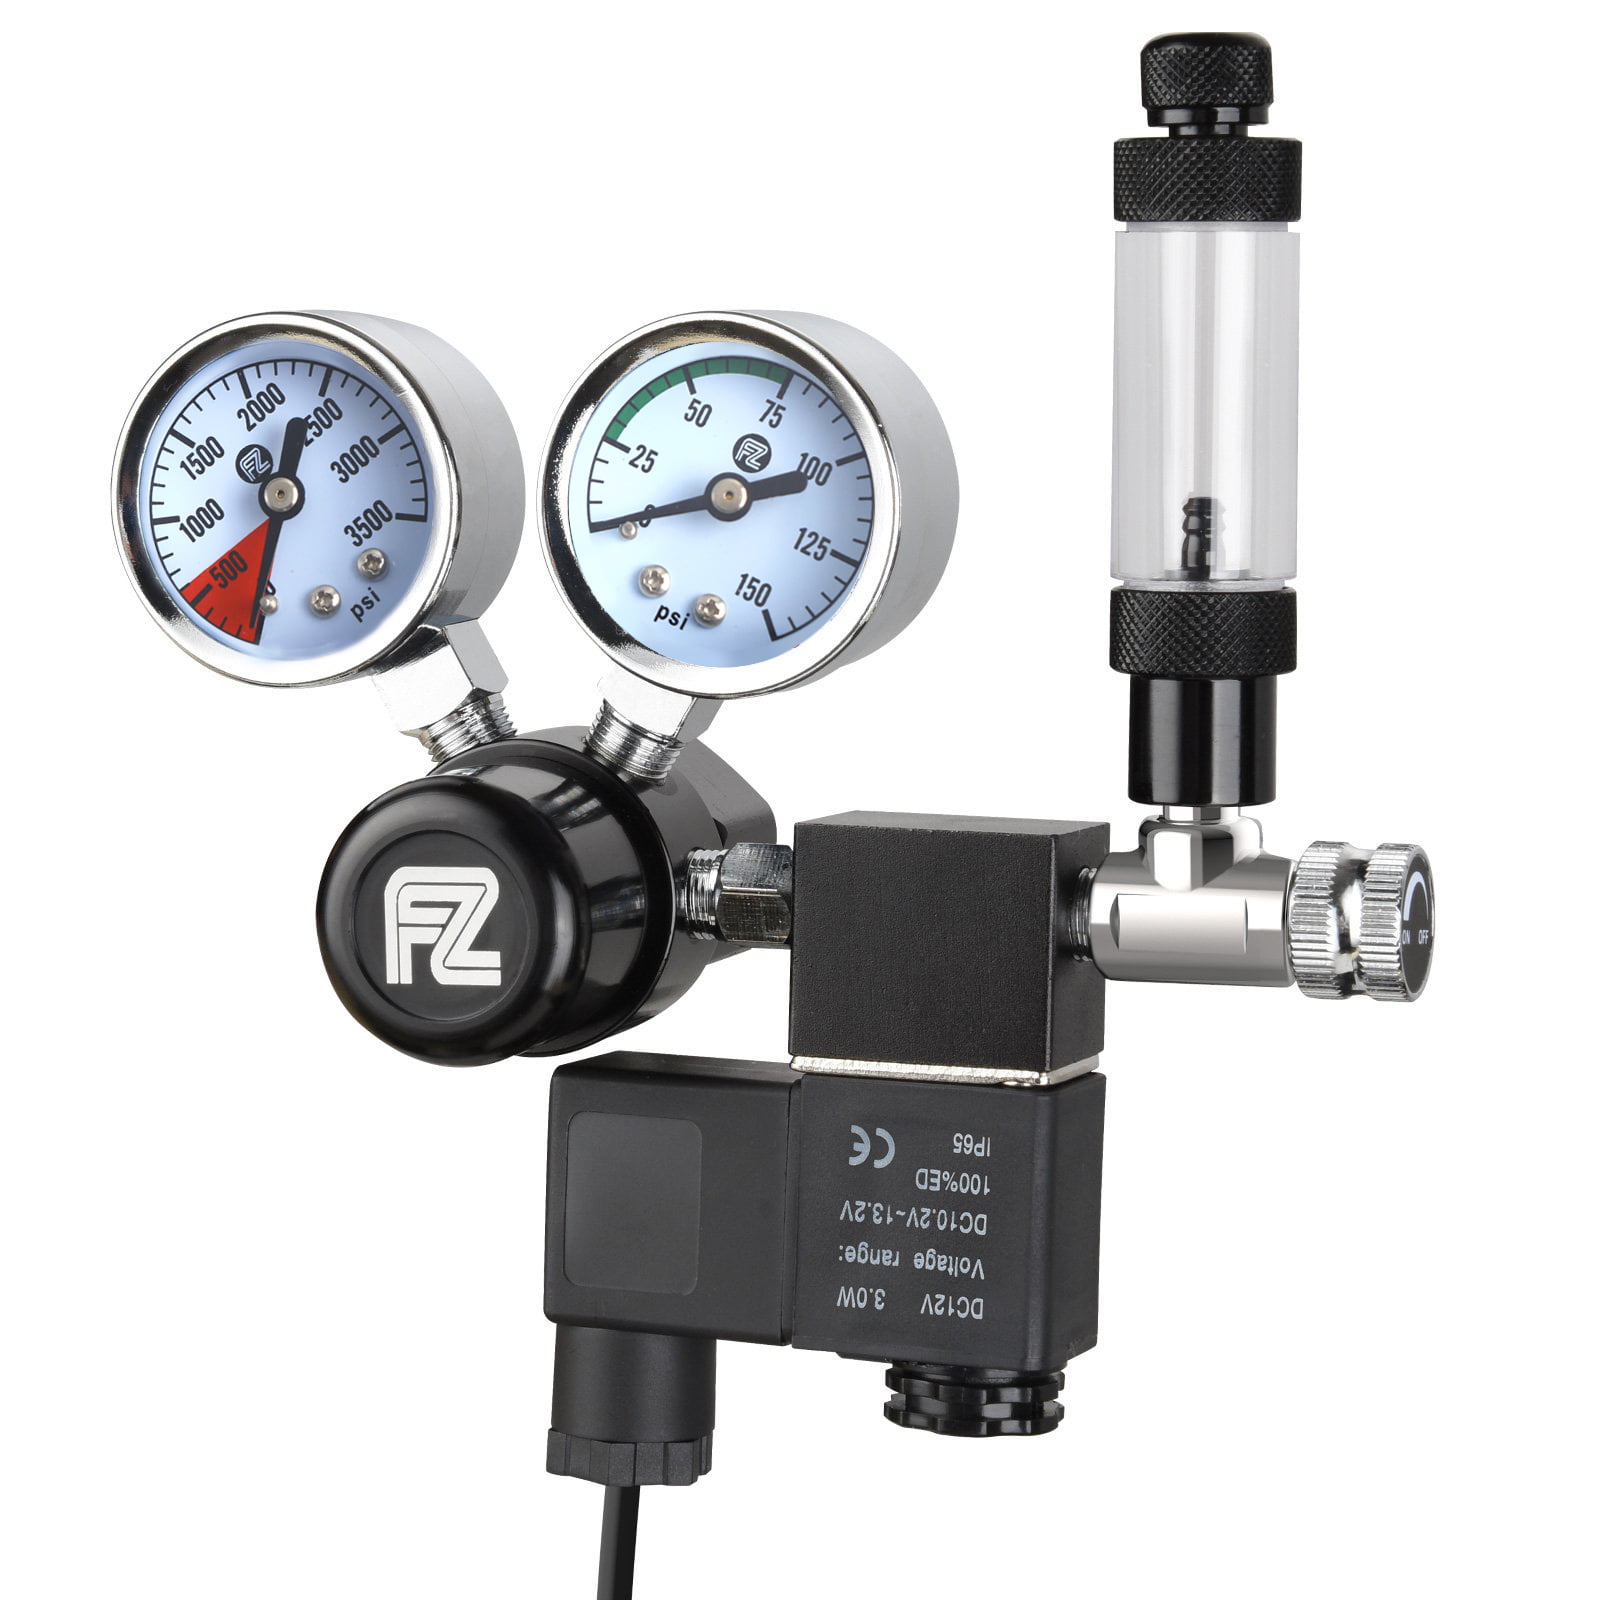 FZONE Aquarium CO2 Regulator Mini Dual Gauge Display DC Solenoid with Bubble Counter and Check Valve for US Standard CGA320 CO2 Cylinder